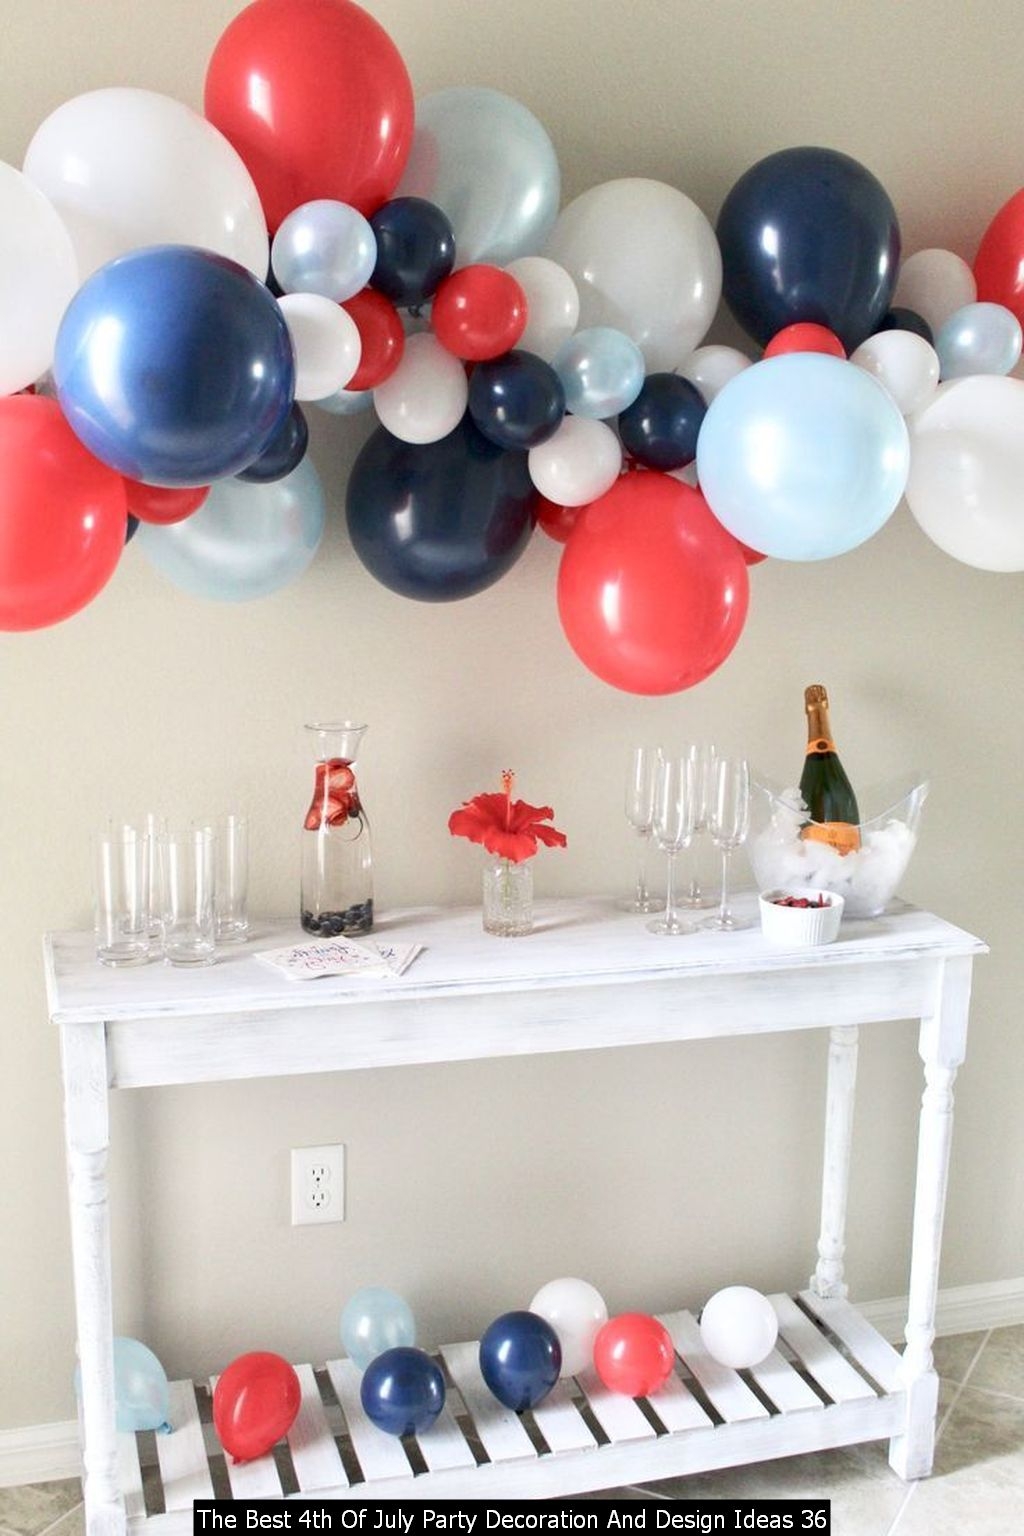 The Best 4th Of July Party Decoration And Design Ideas 36